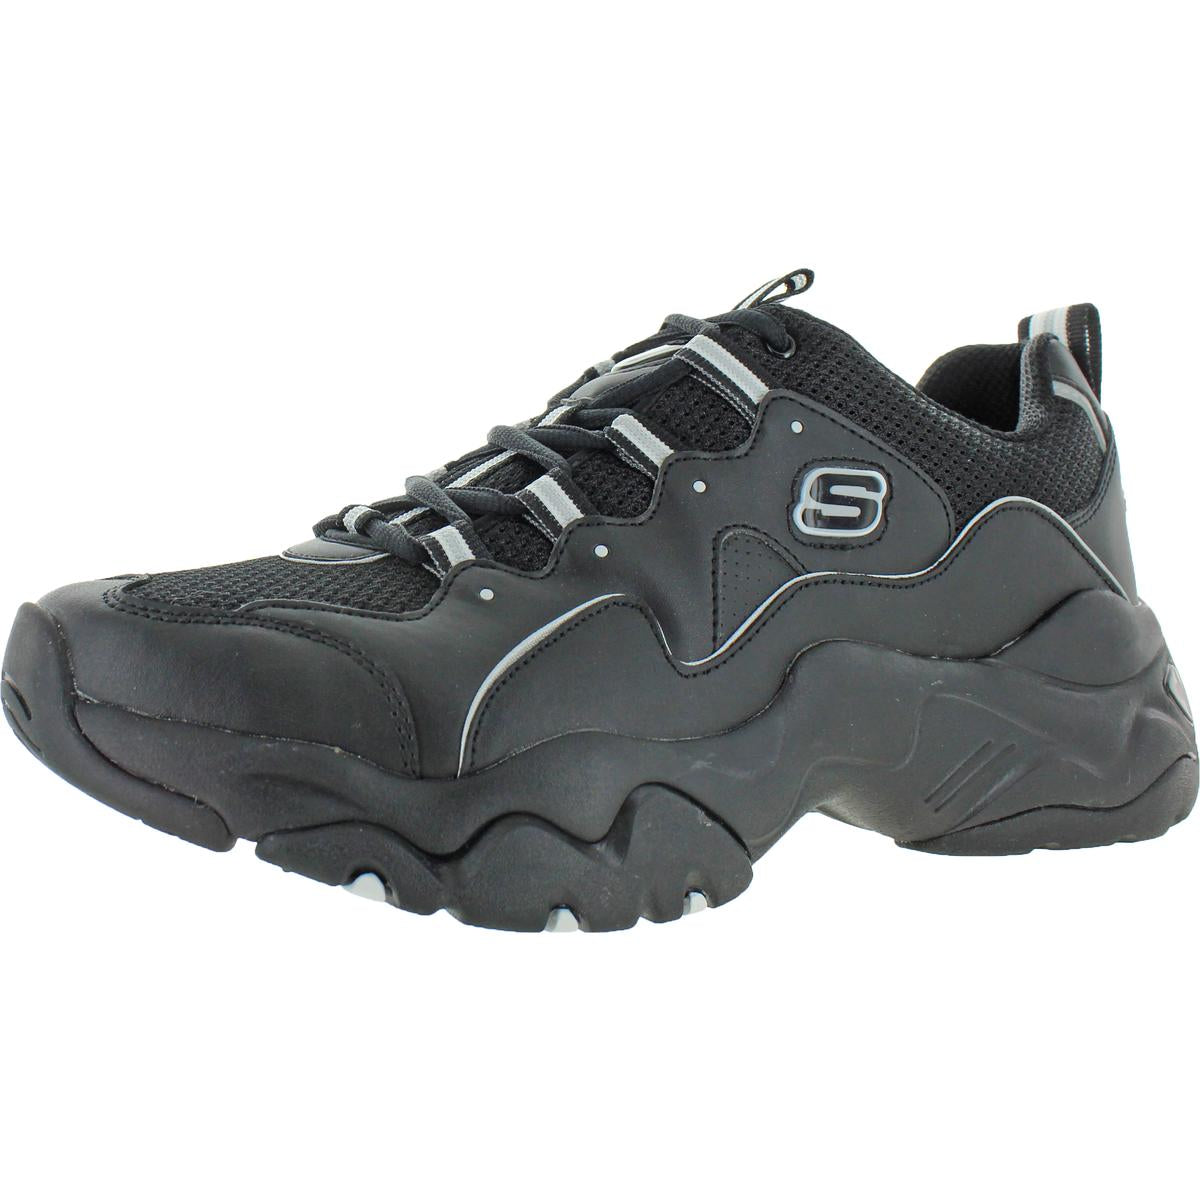 D'Lites 3 -Silverwood Mens Comfort Chunky Sneakers - WoodworkingCore